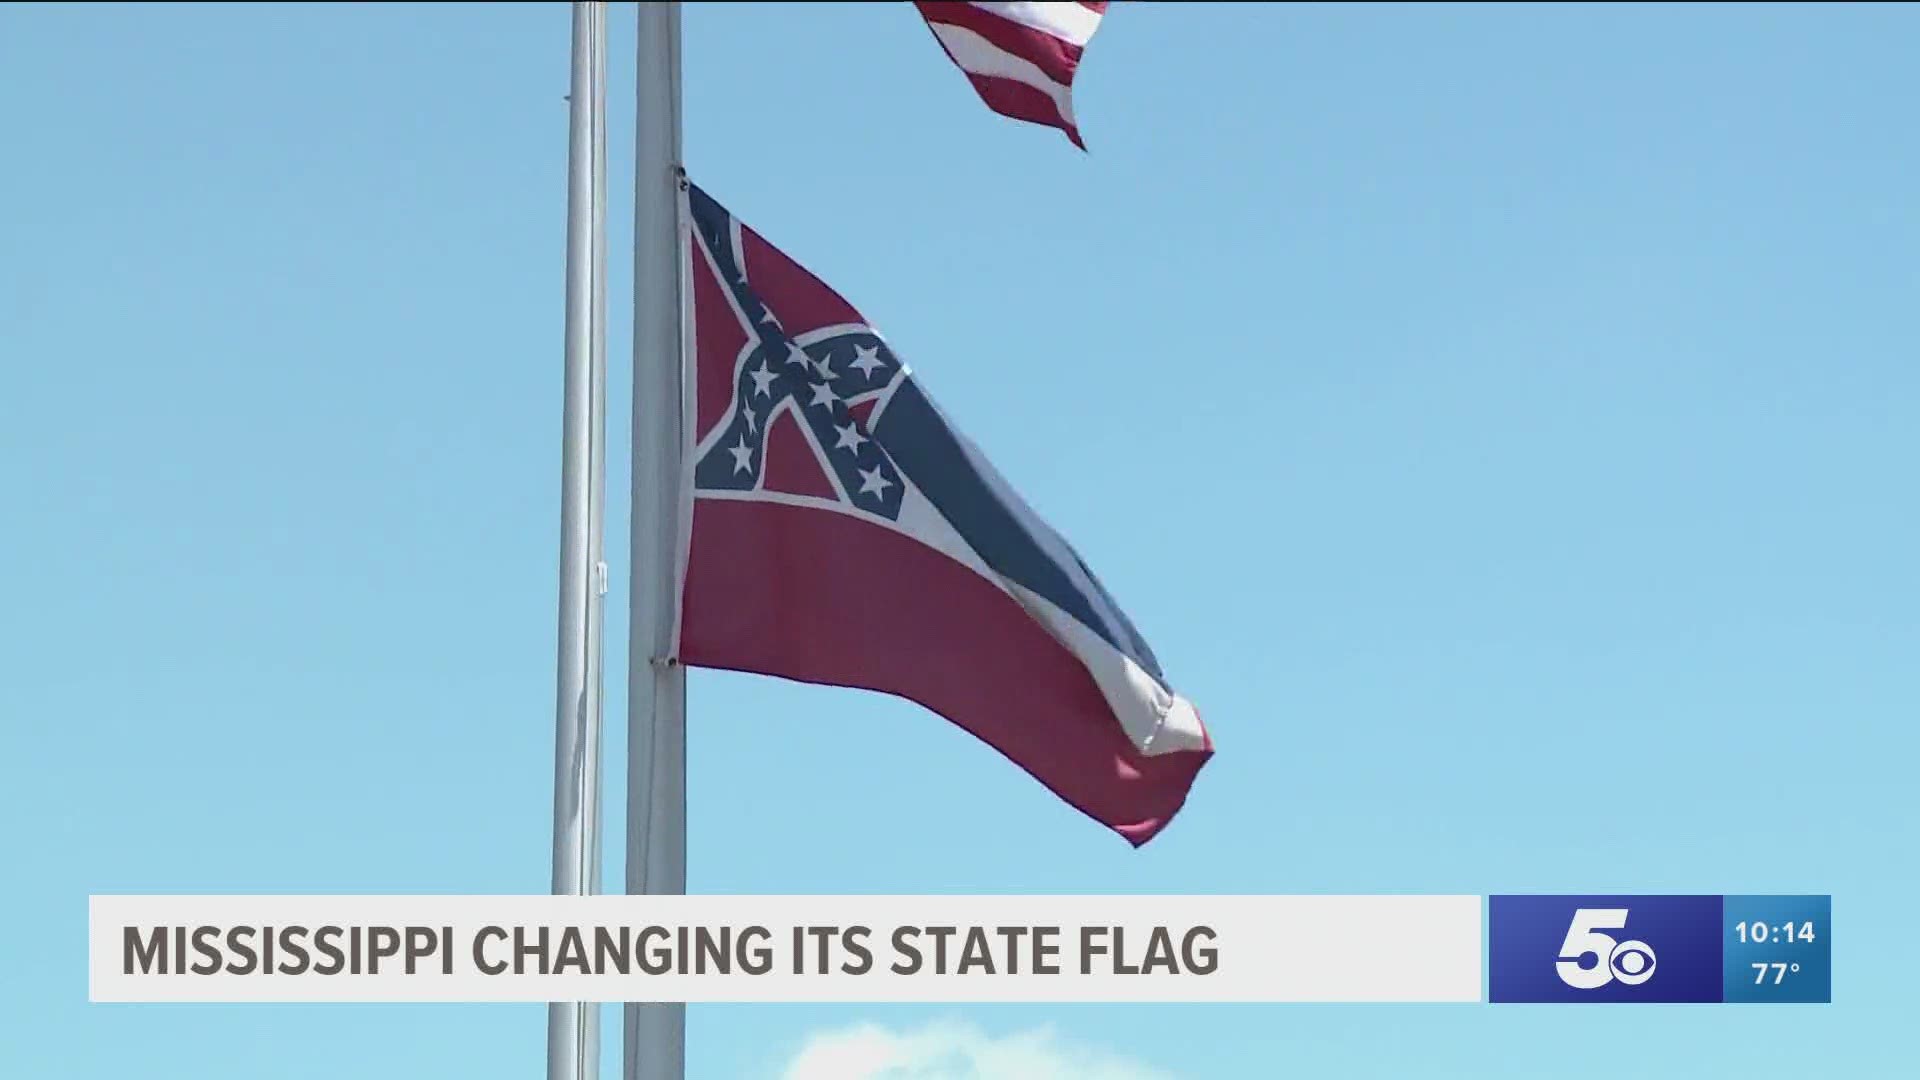 Mississippi changing its state flag.